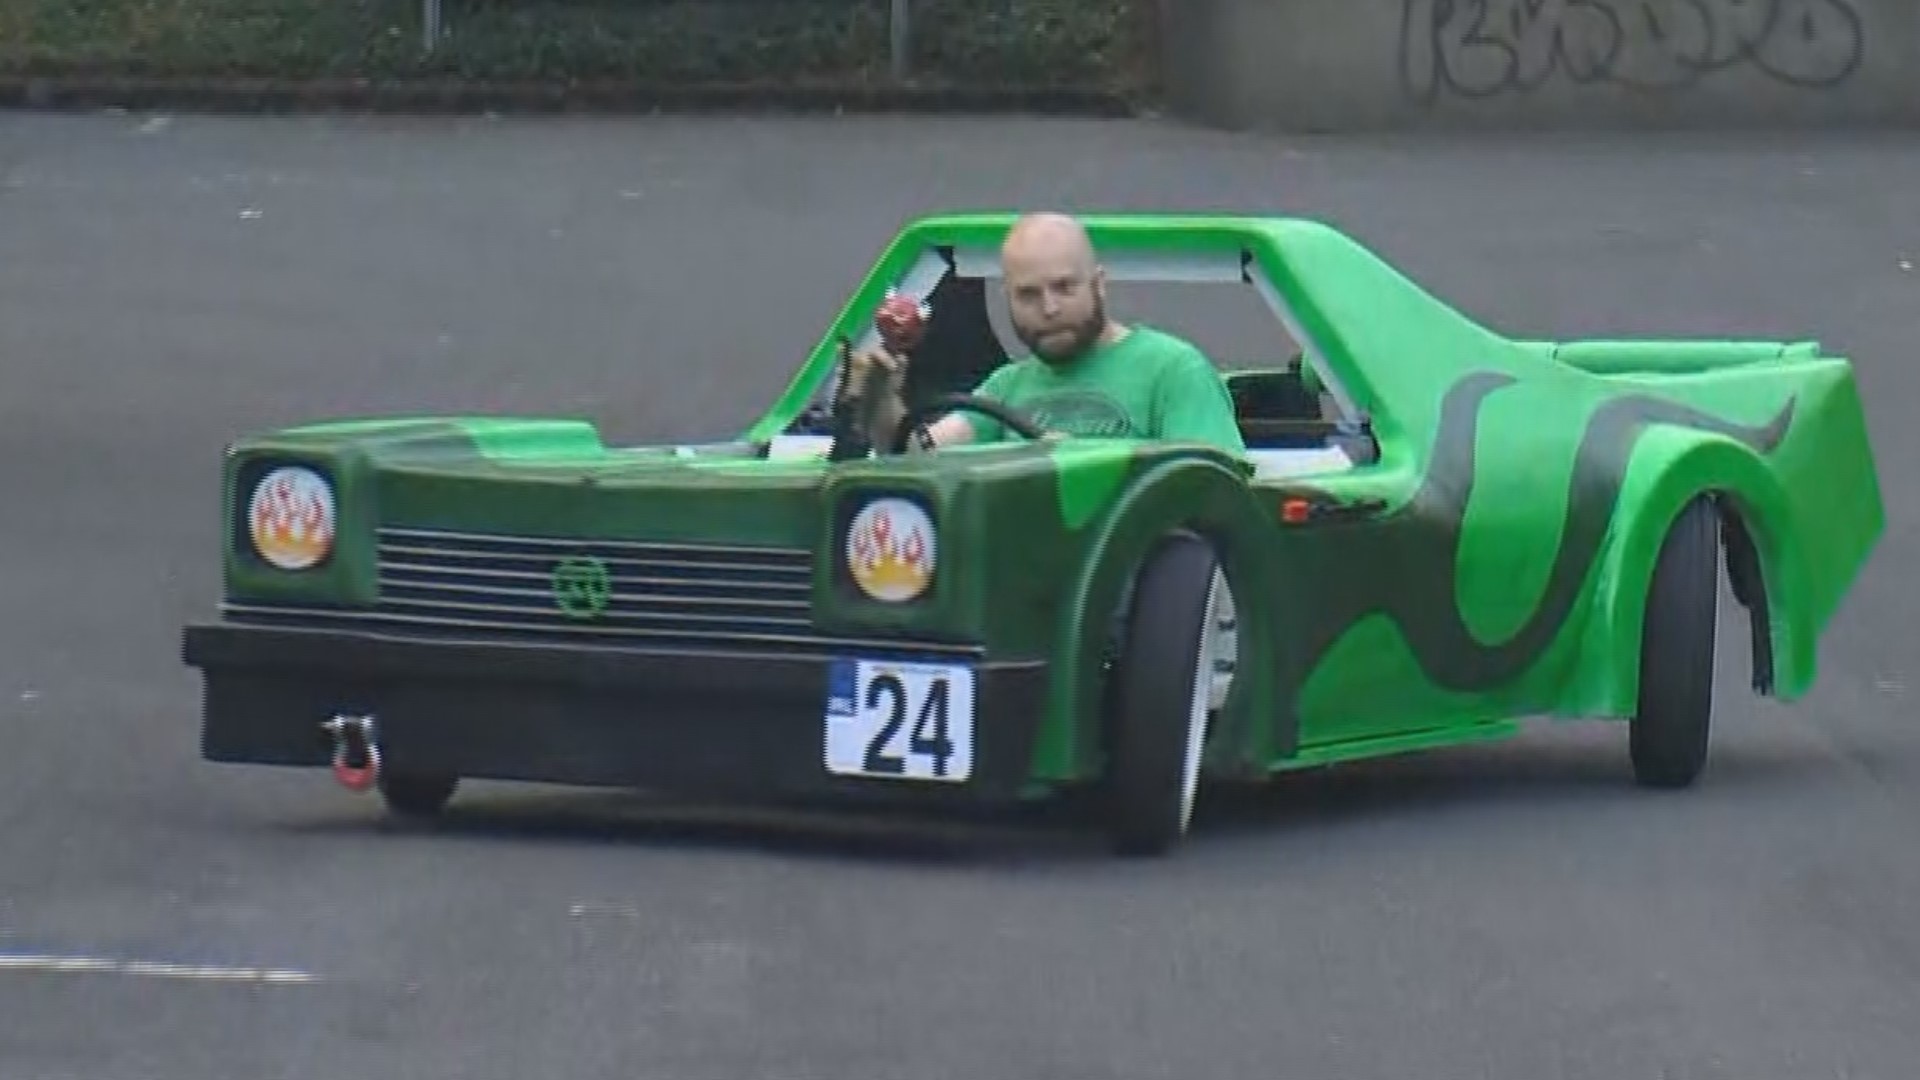 The PDX Adult Soapbox Derby will take place at Mt. Tabor Park on Aug. 20. Drew Carney got a preview of the fun and had the chance to ride inside a soapbox car.